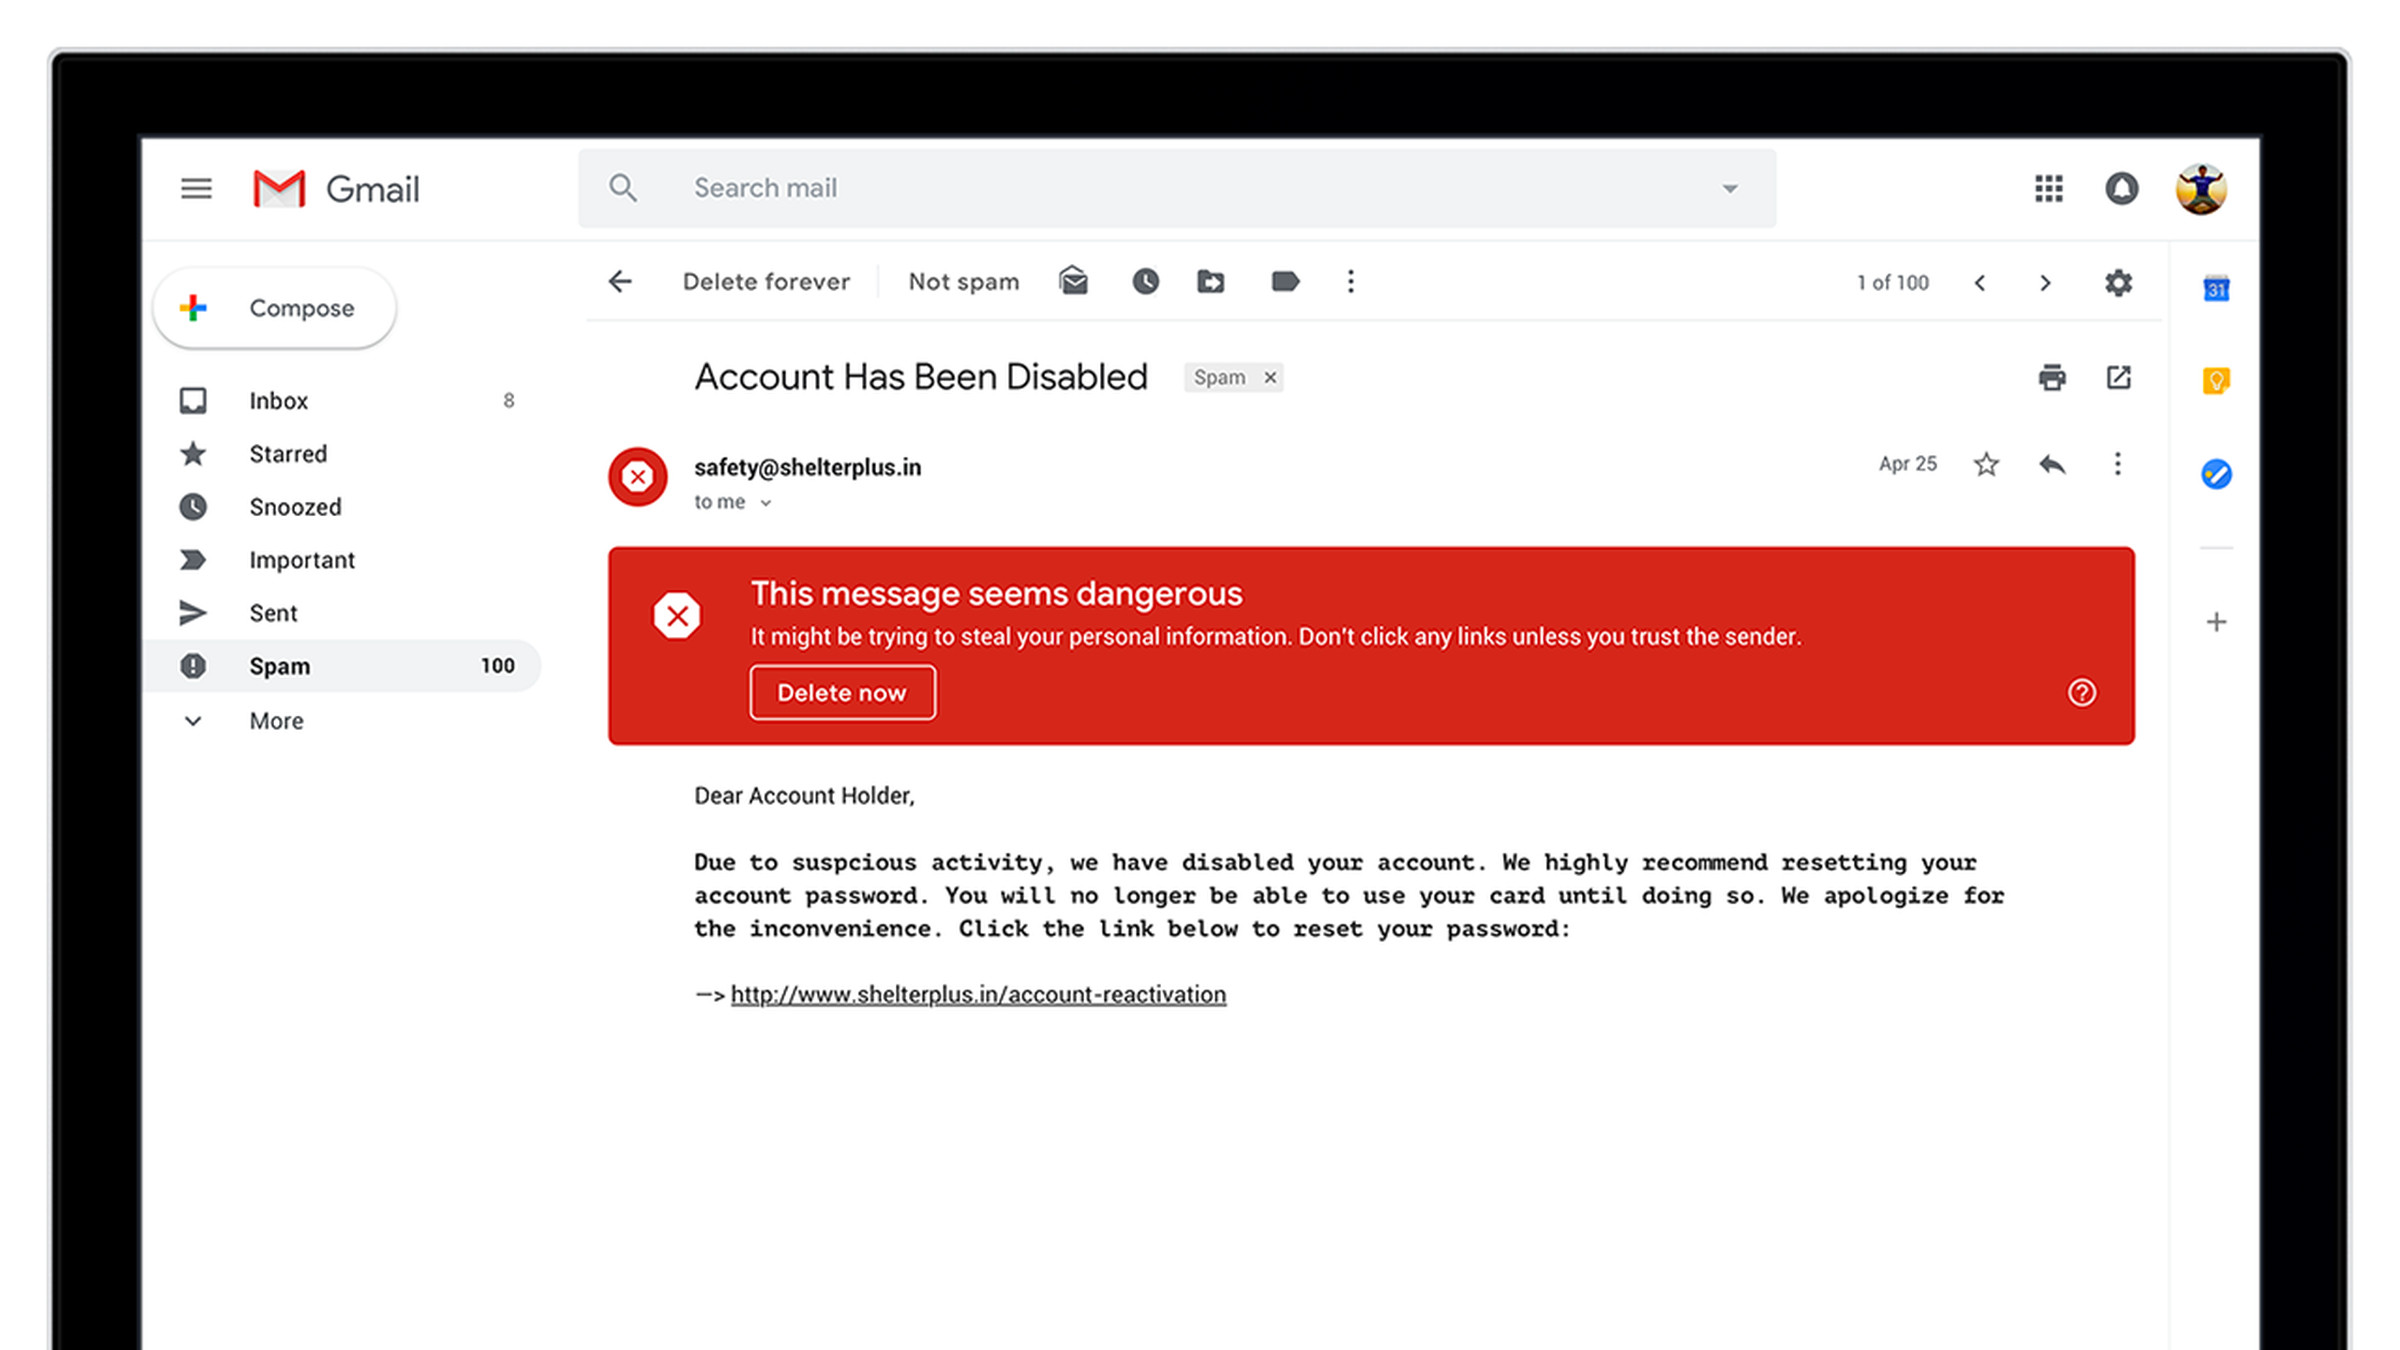 Google’s phishing warnings have grown in size and prominence.